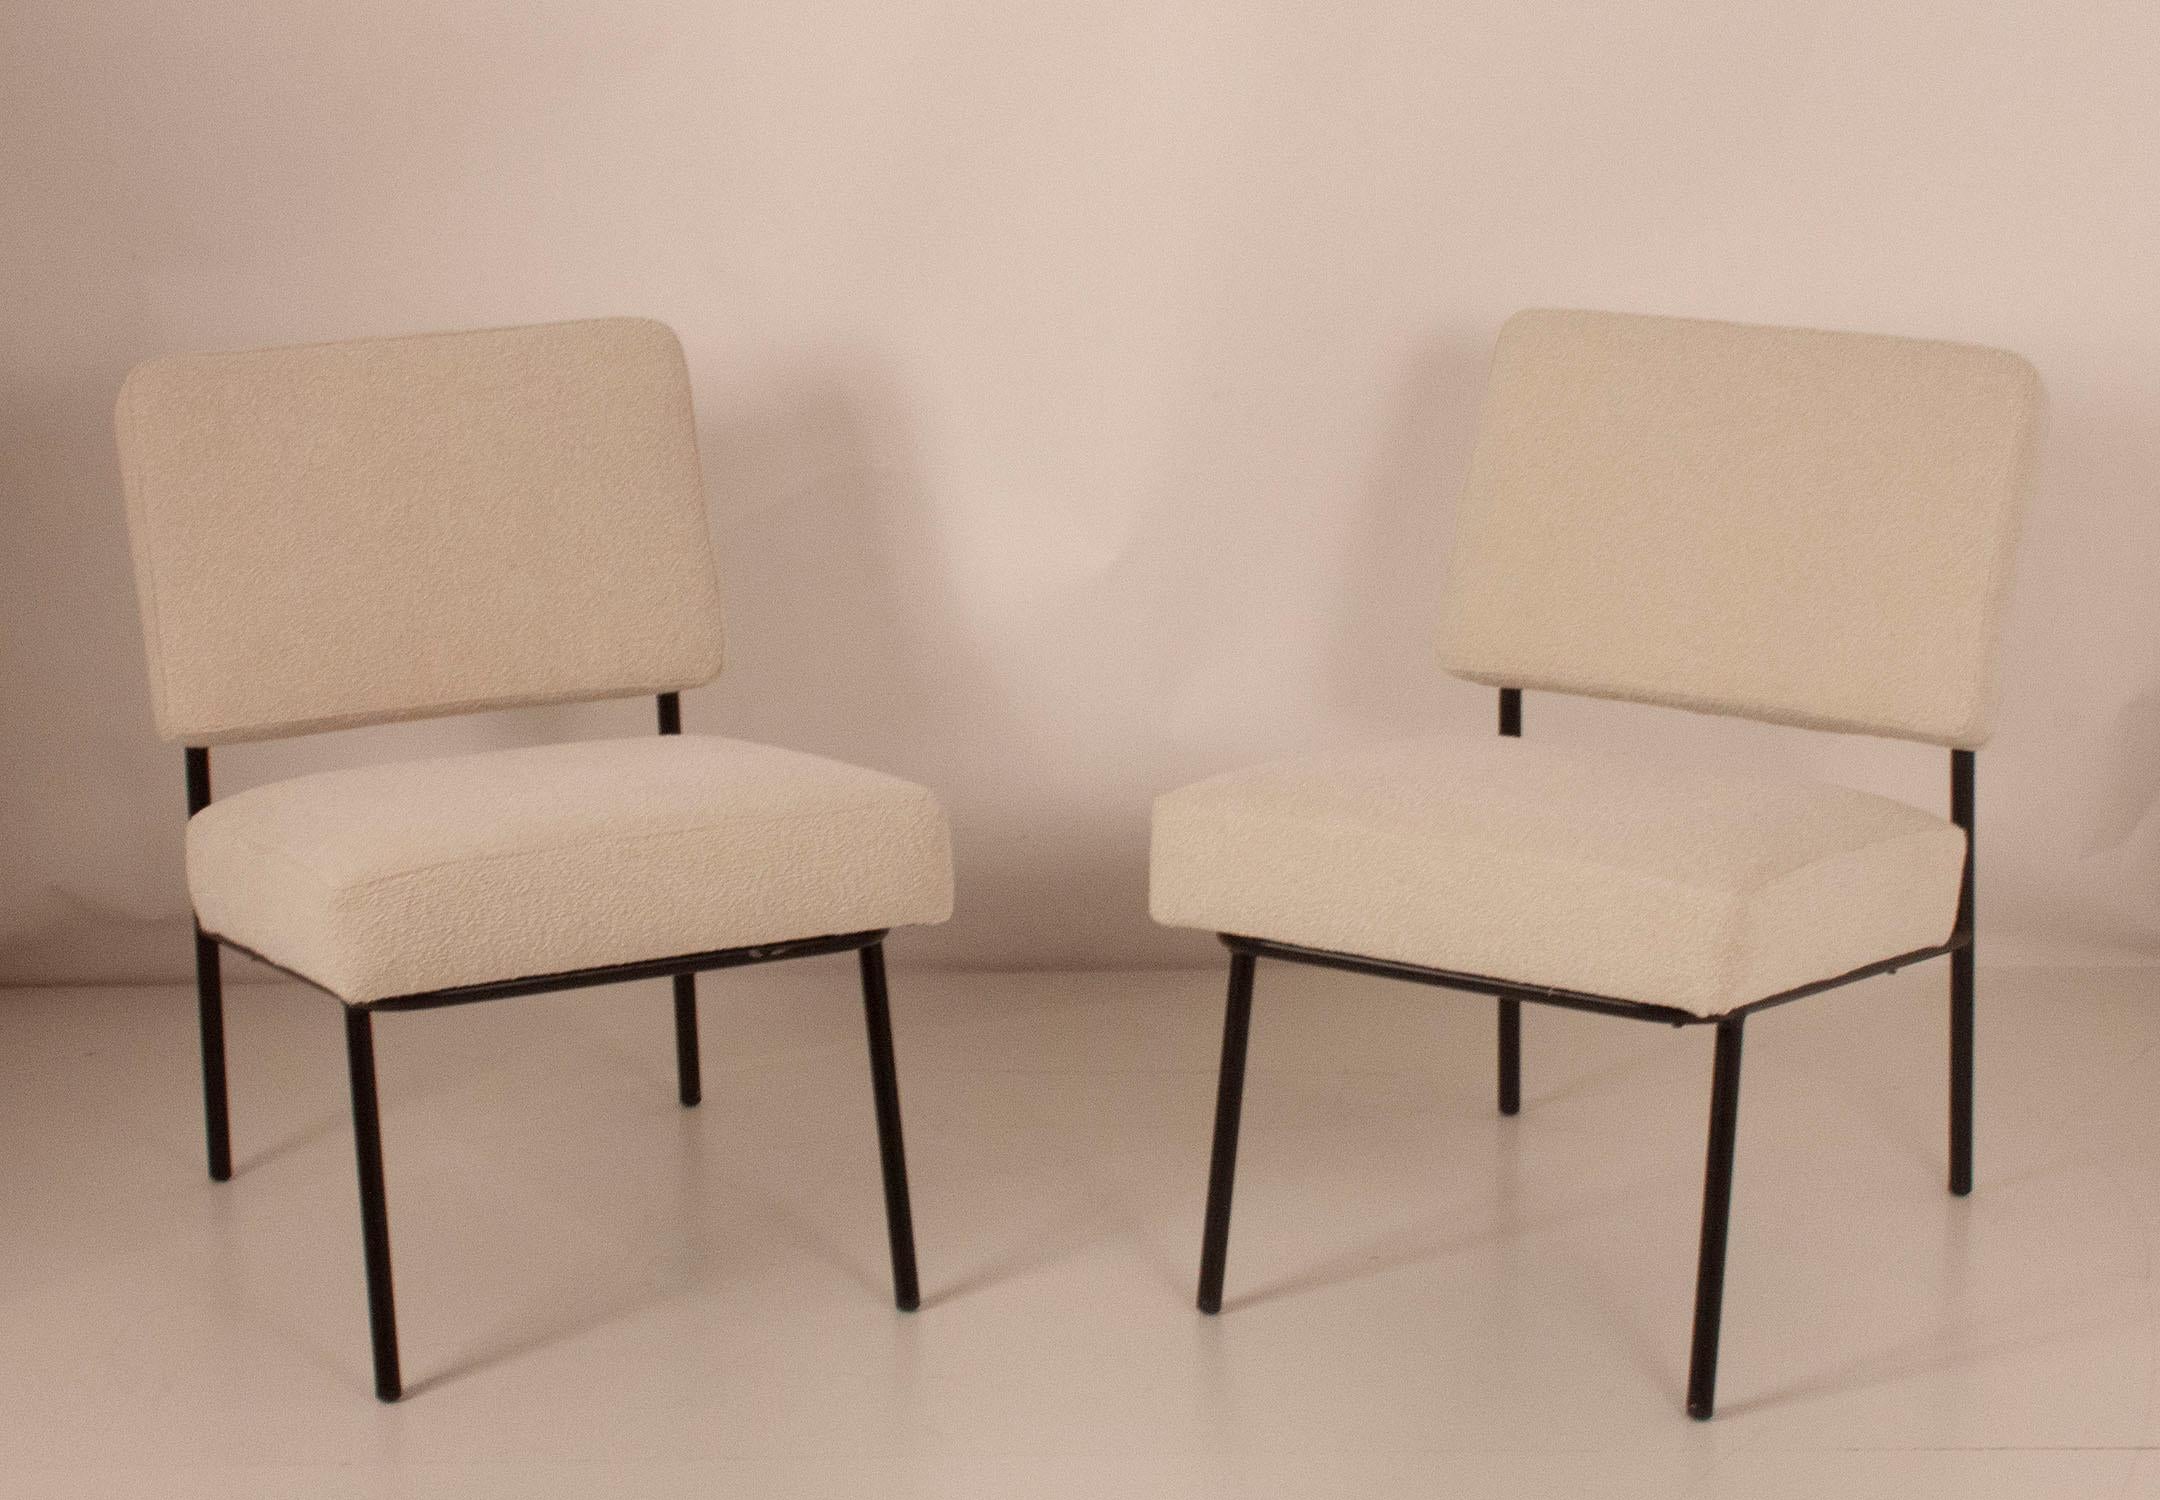 Easy chairs in the style of Pierre Guariche, 1950s, Spain, set of 2.
In very good condition. They are restored and upholstered again in a white fabric.